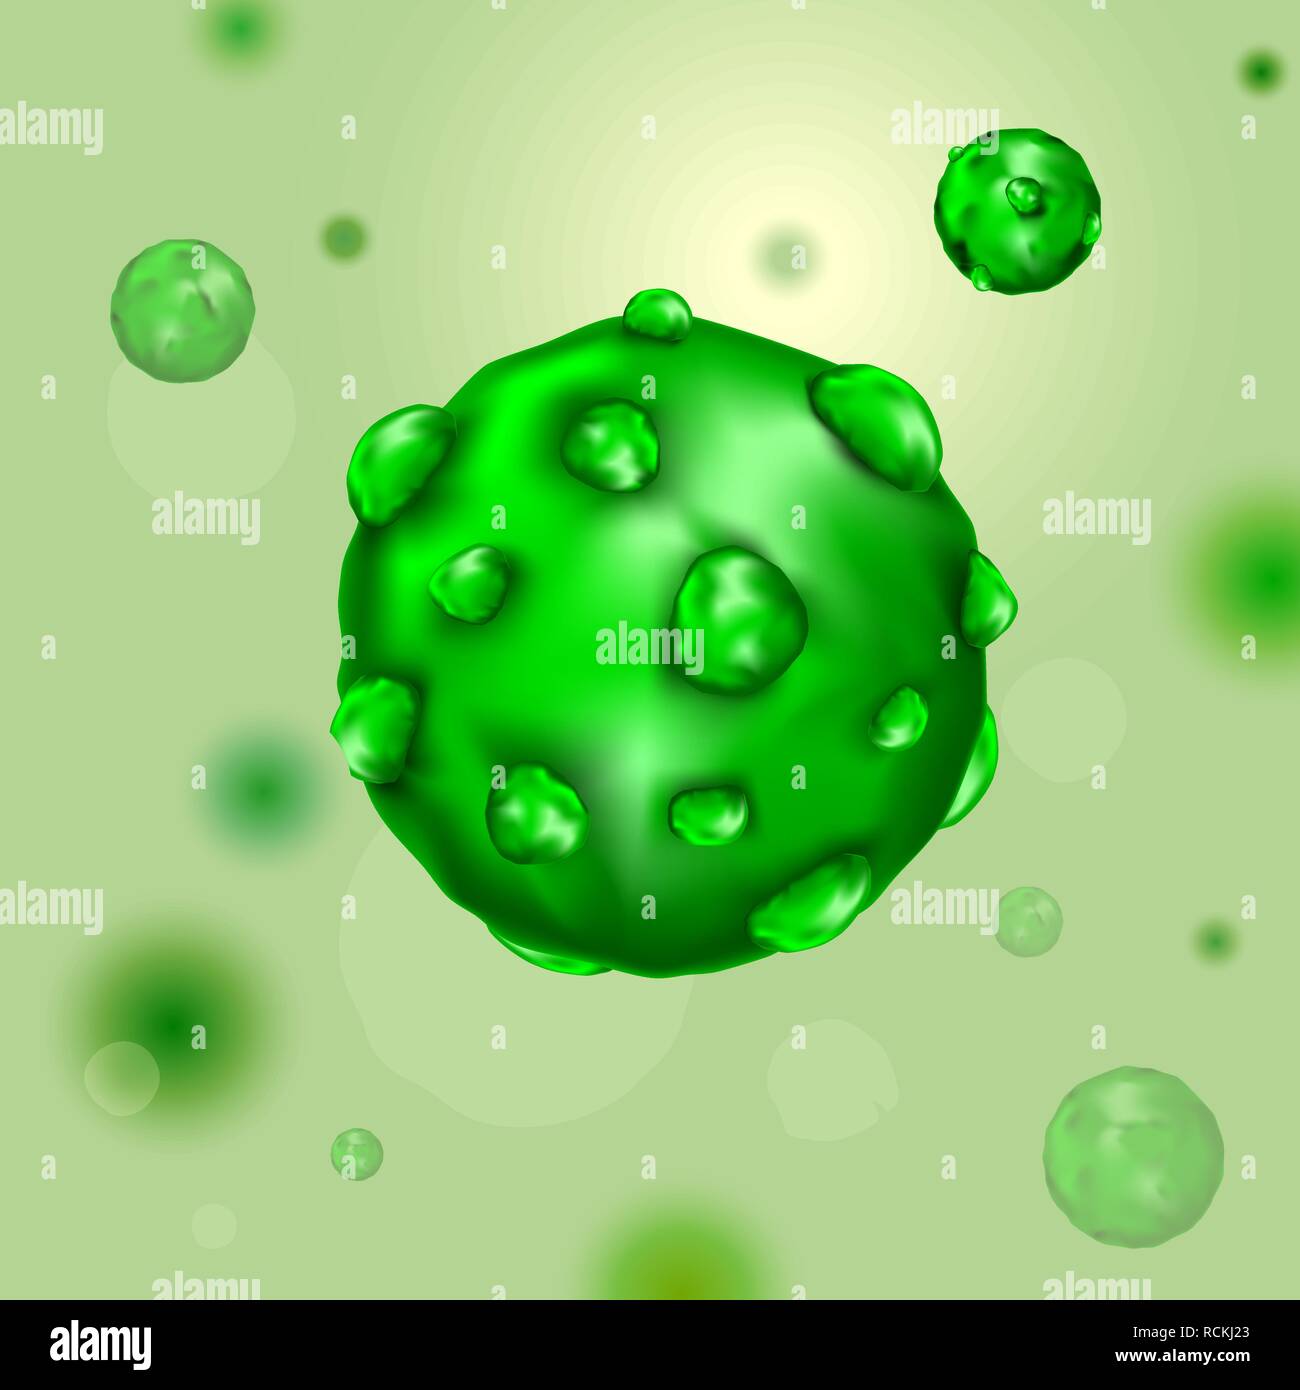 Vector illustration virus in shades of green. Biology, medicine. The bacterium under the microscope. Stock Vector